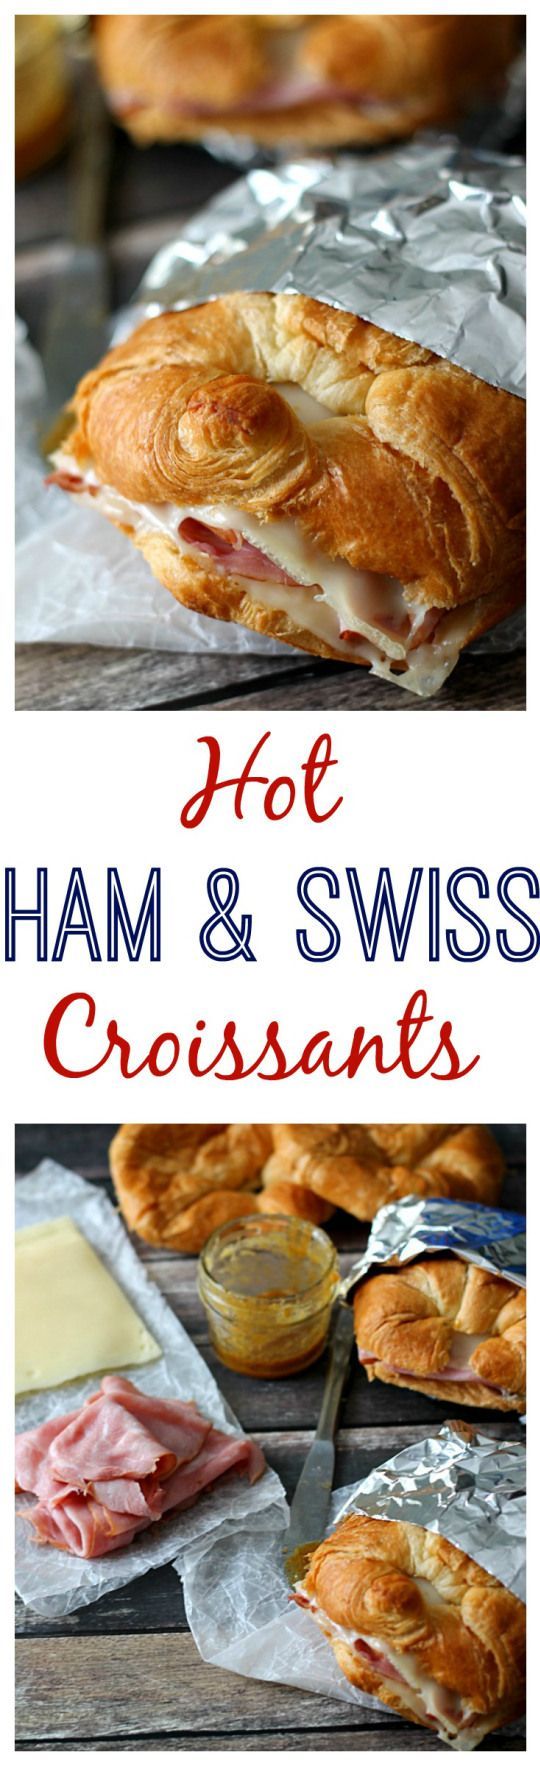 Hot Ham & Swiss Croissants- (!!!!) extremely easy et good. The sauce is really good but slightly too sweet. (Which I preferred ).